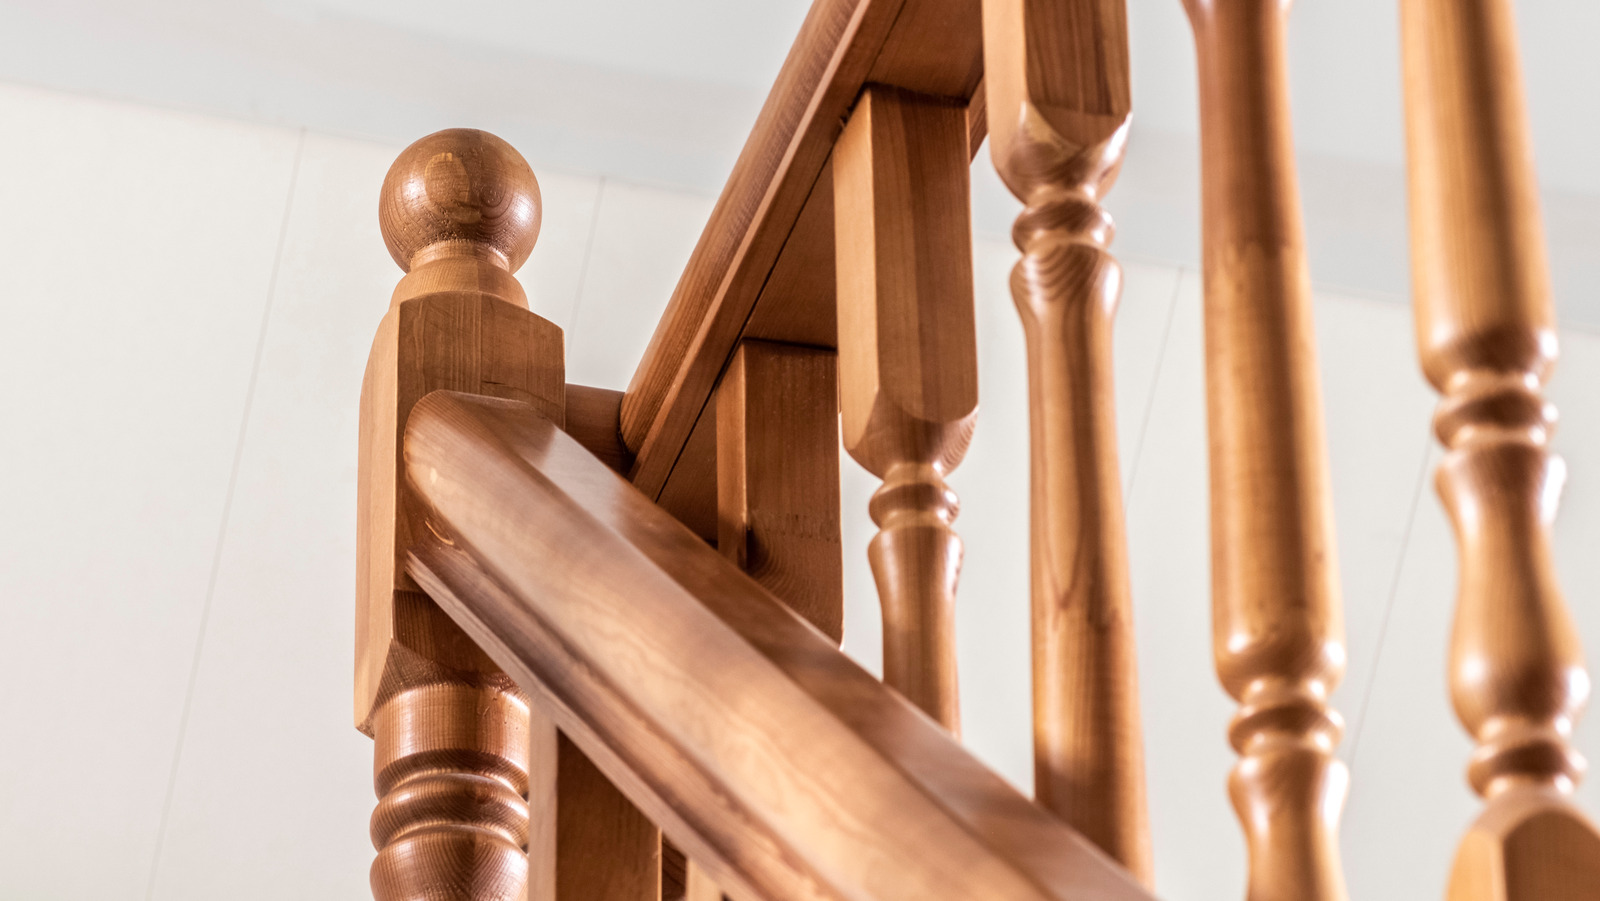 Choosing Your Spindles